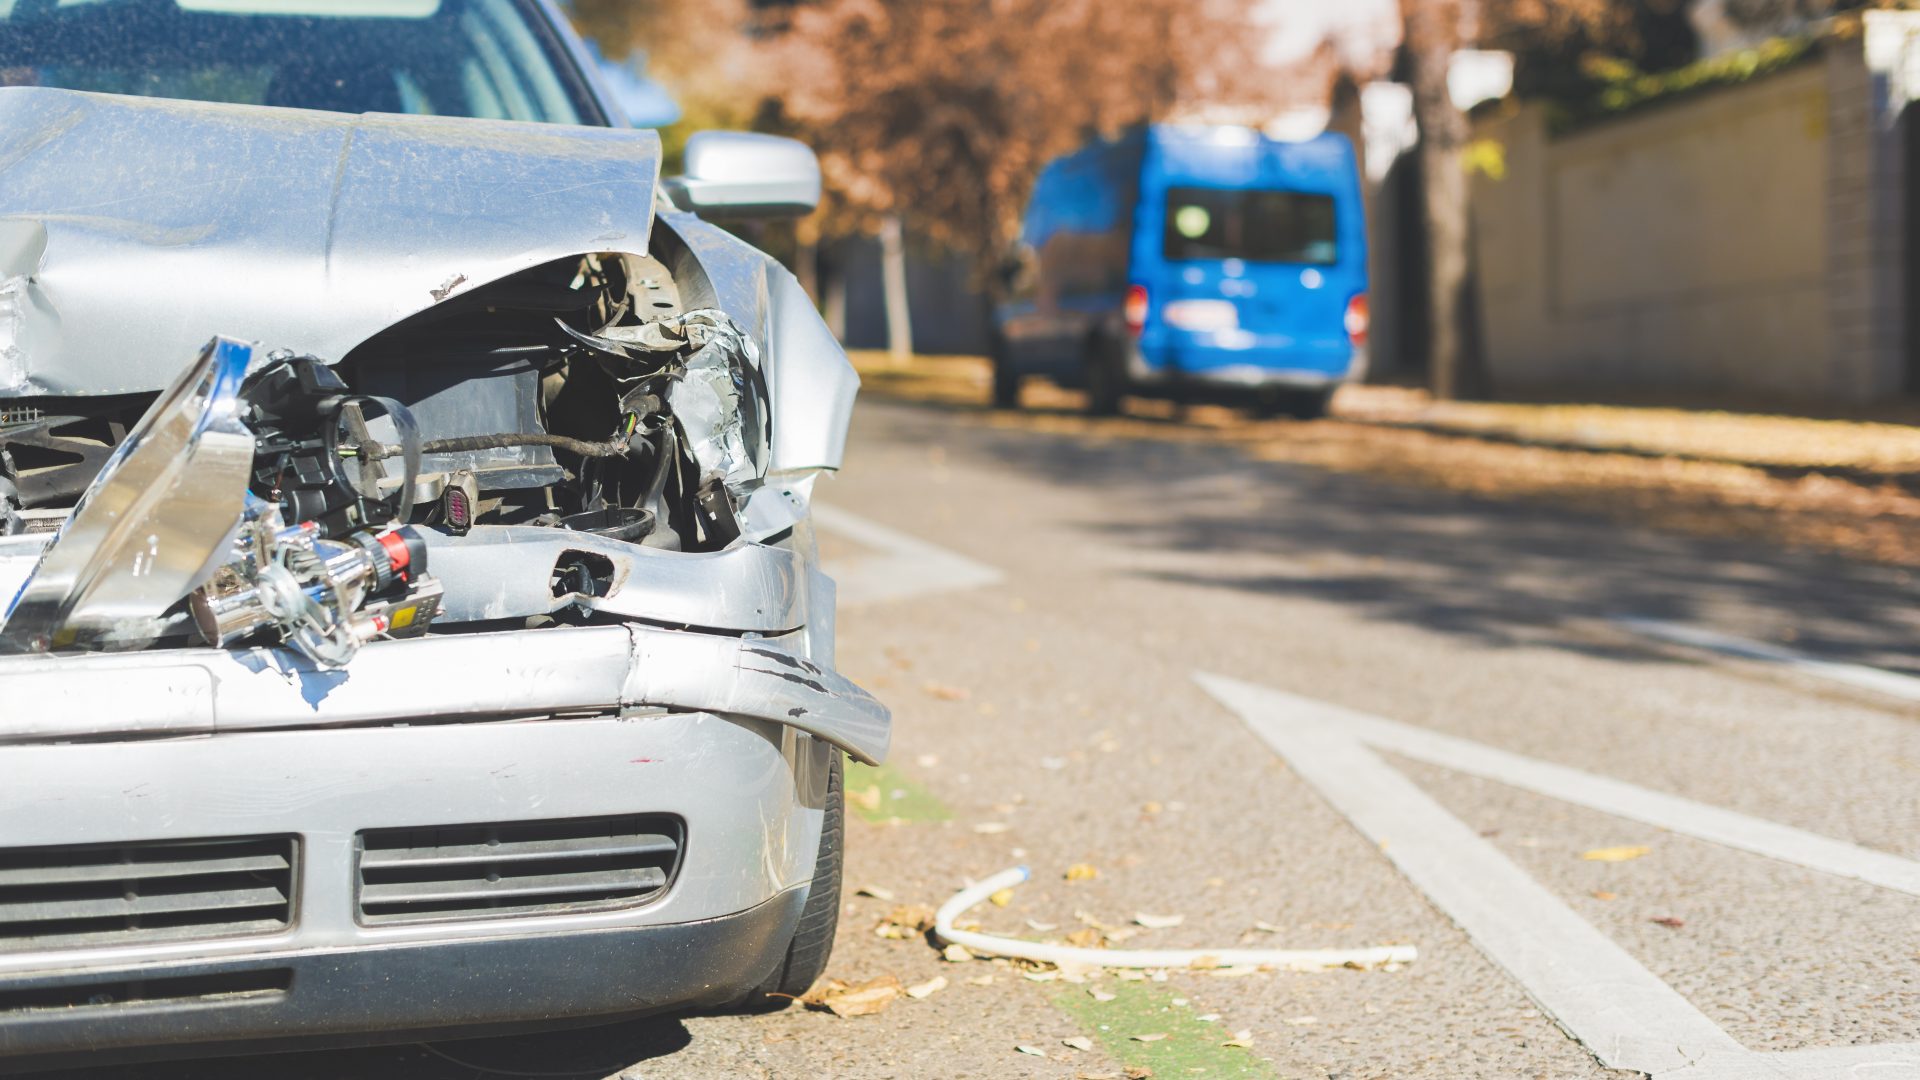 What Happens to Your Car When the Accident Isn't Your Fault?